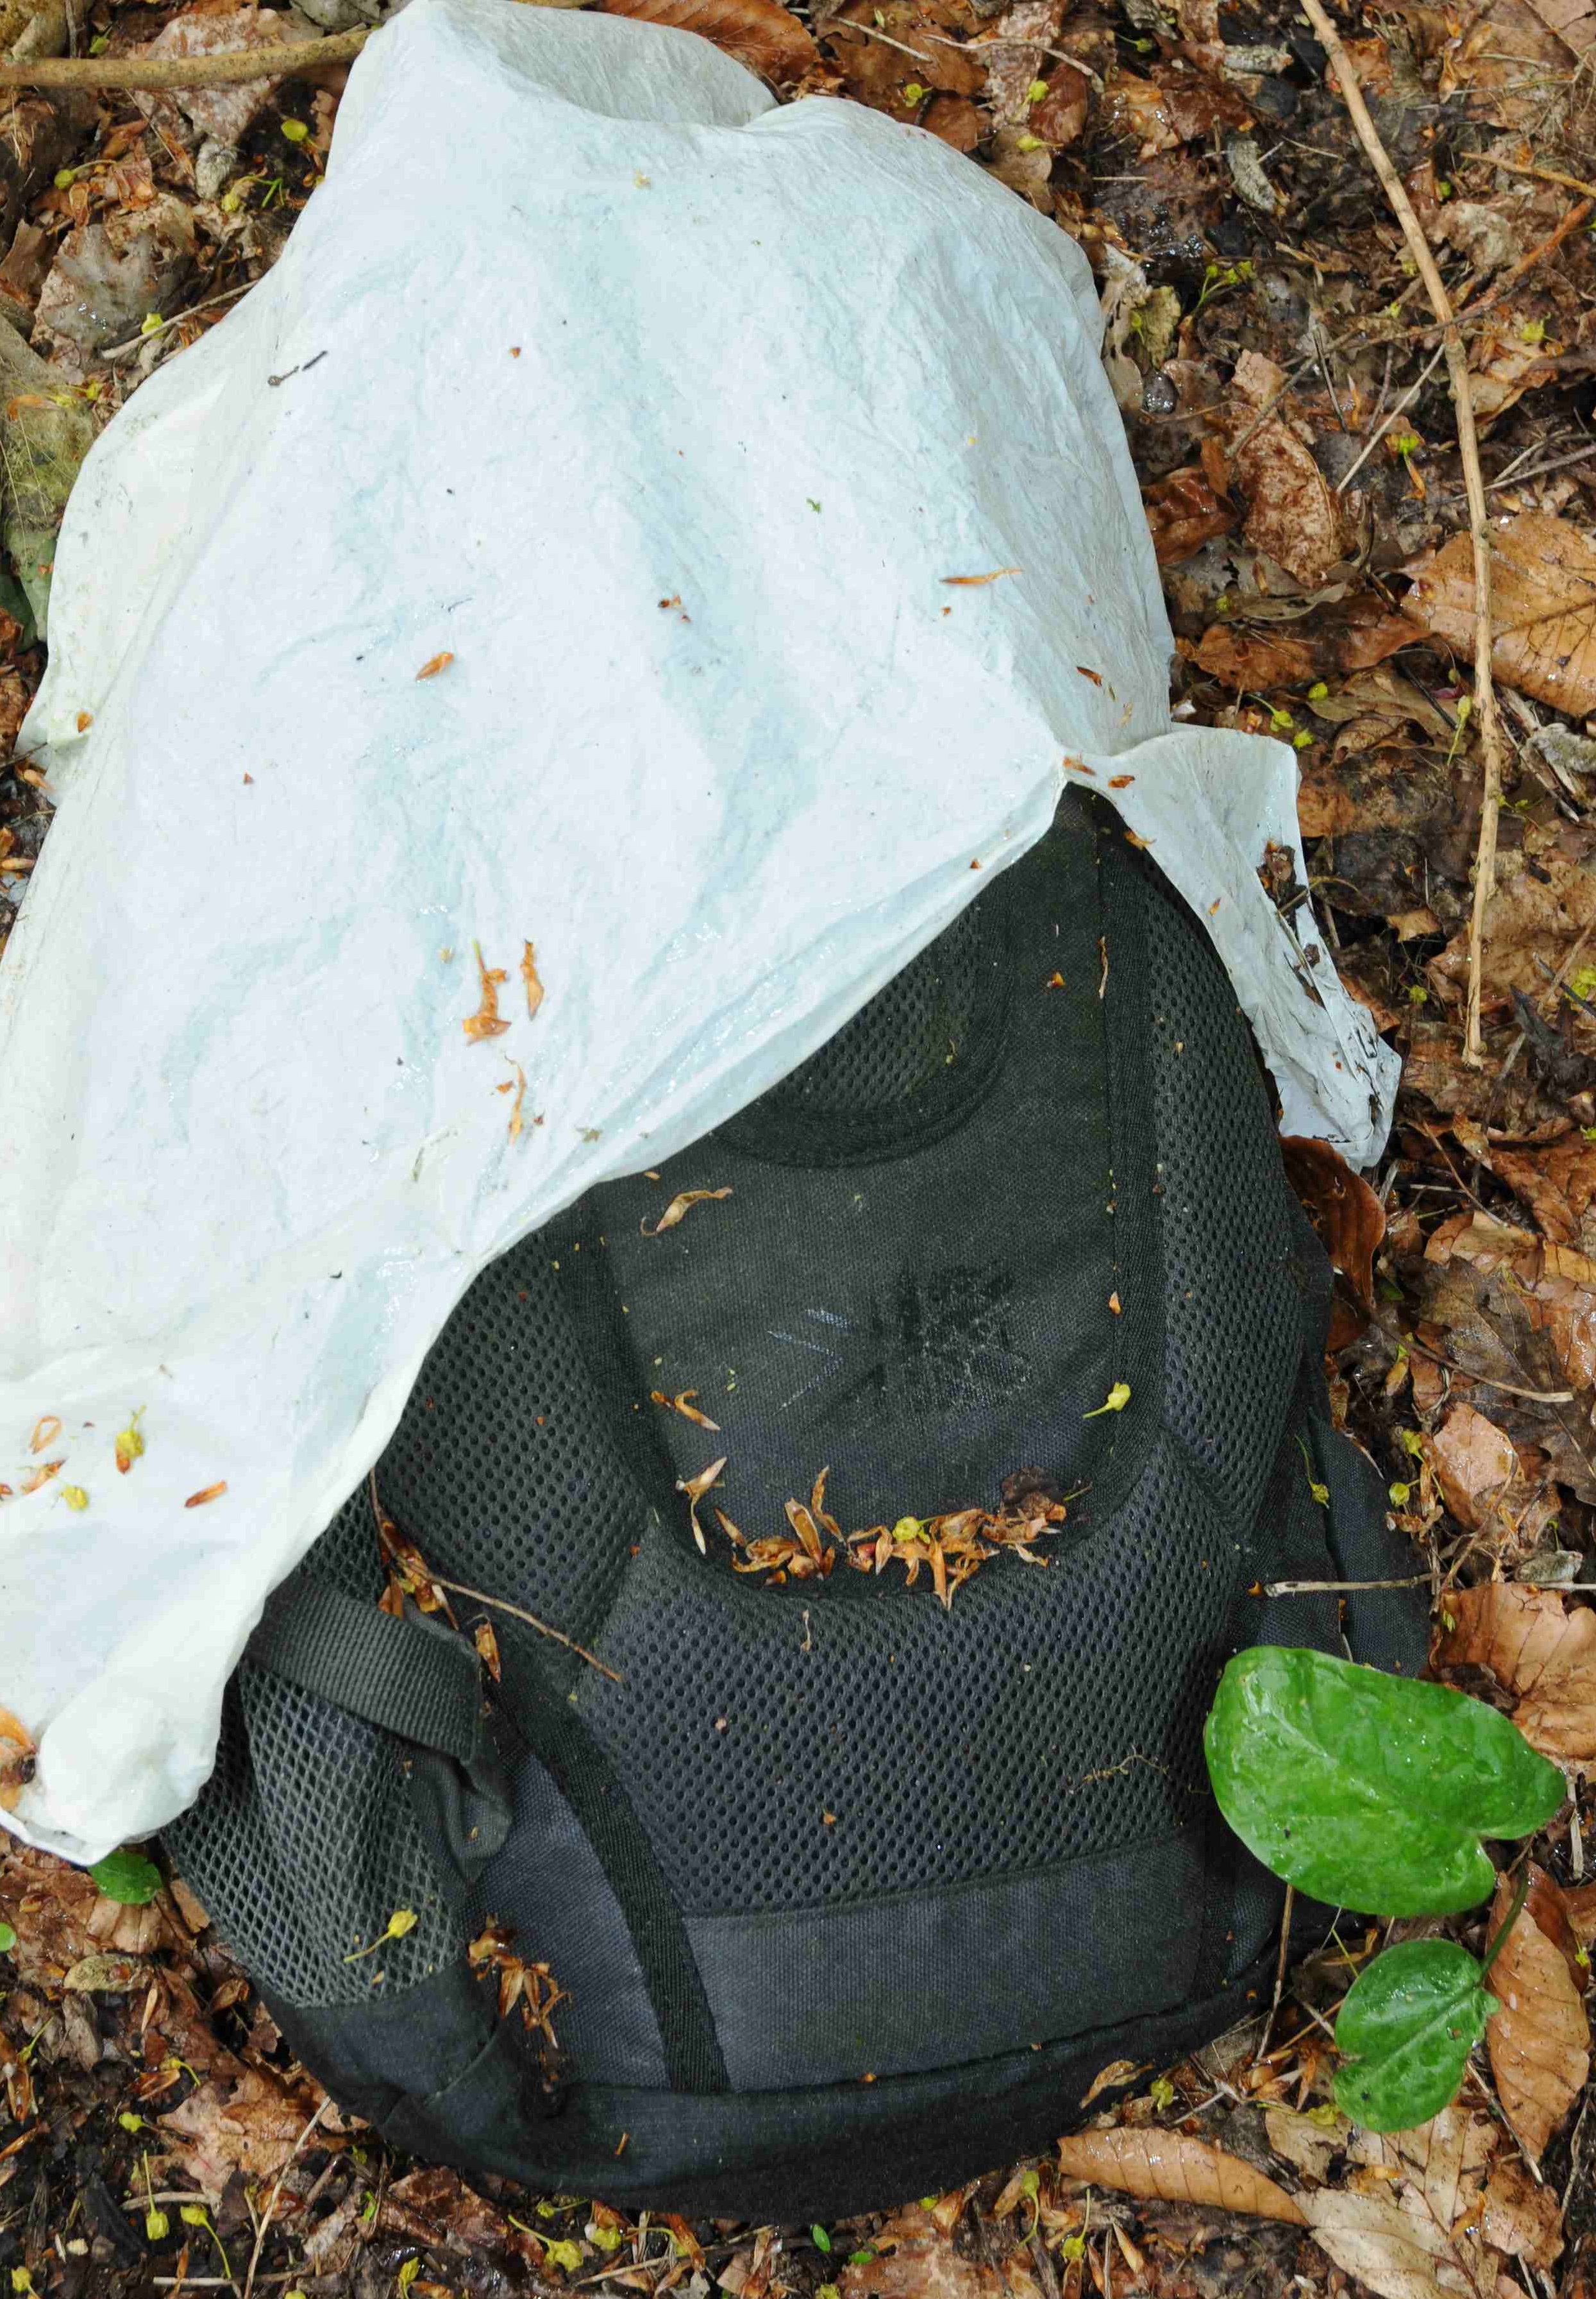 A Karrimor rucksack covered with a white plastic bag was recovered from the scene (Gloucestershire Police/PA).